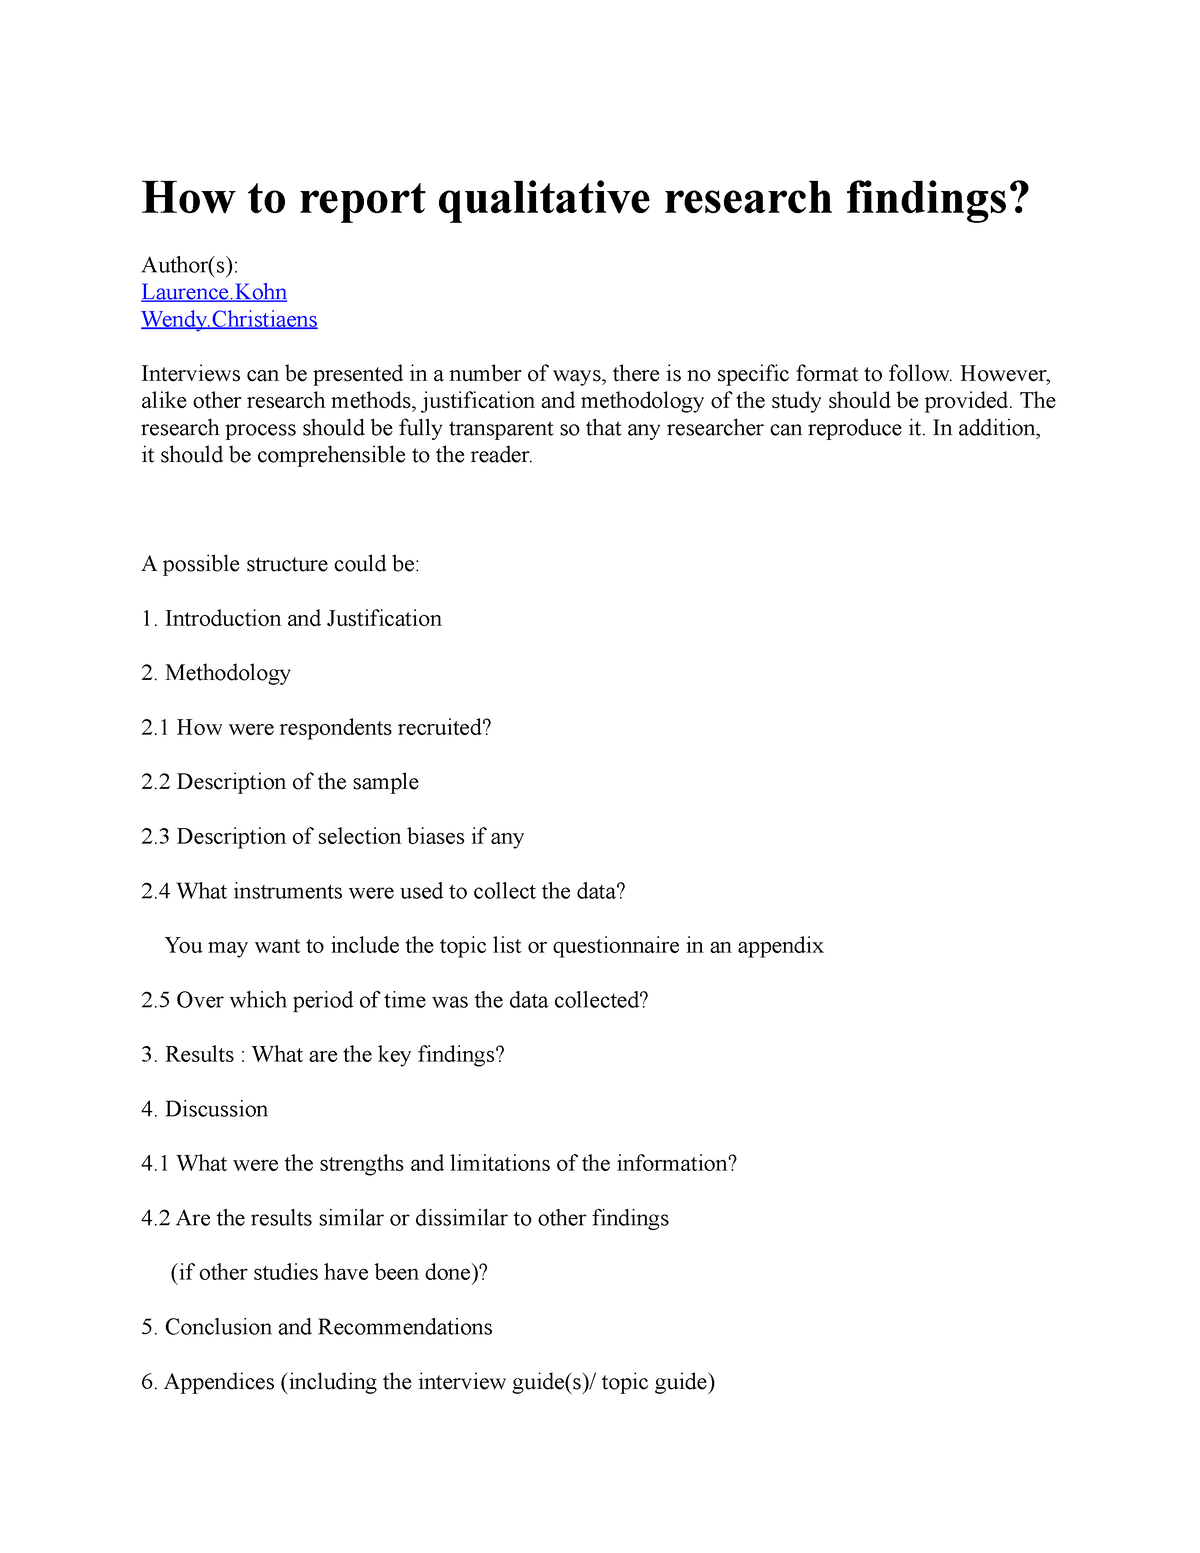 writing findings in qualitative research